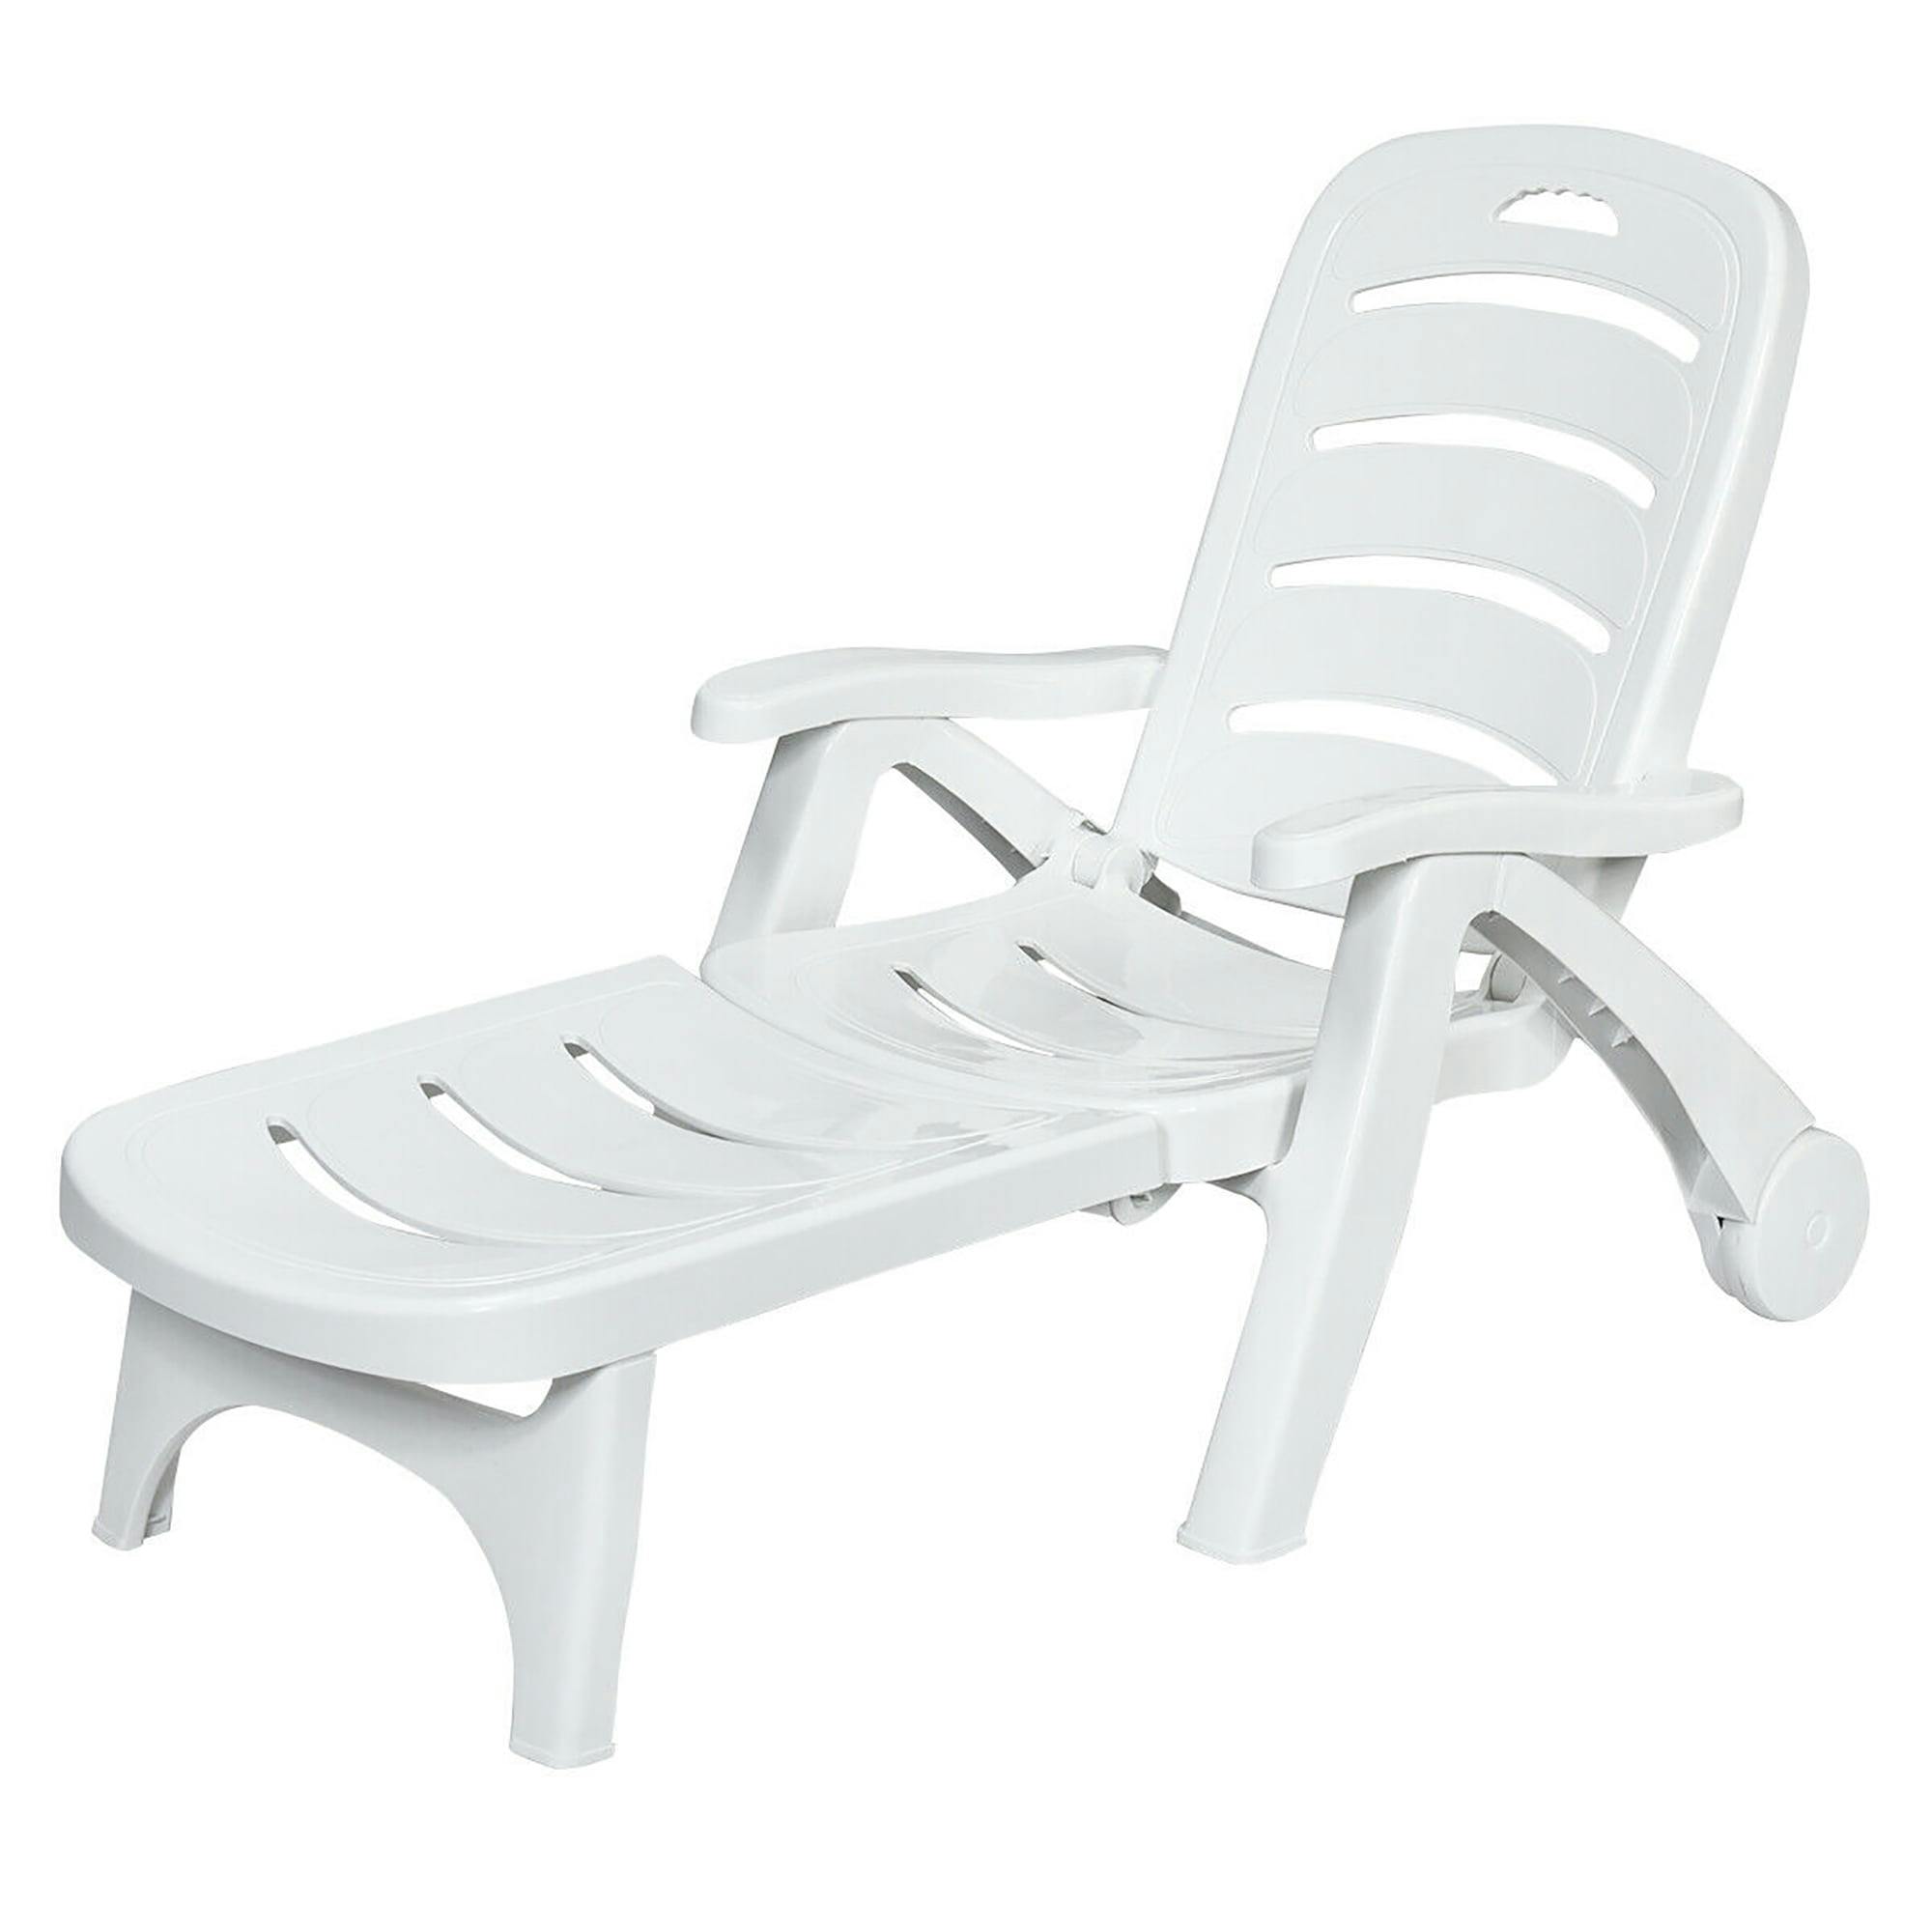 Coastal Breeze White PP Adjustable Chaise with Wheels